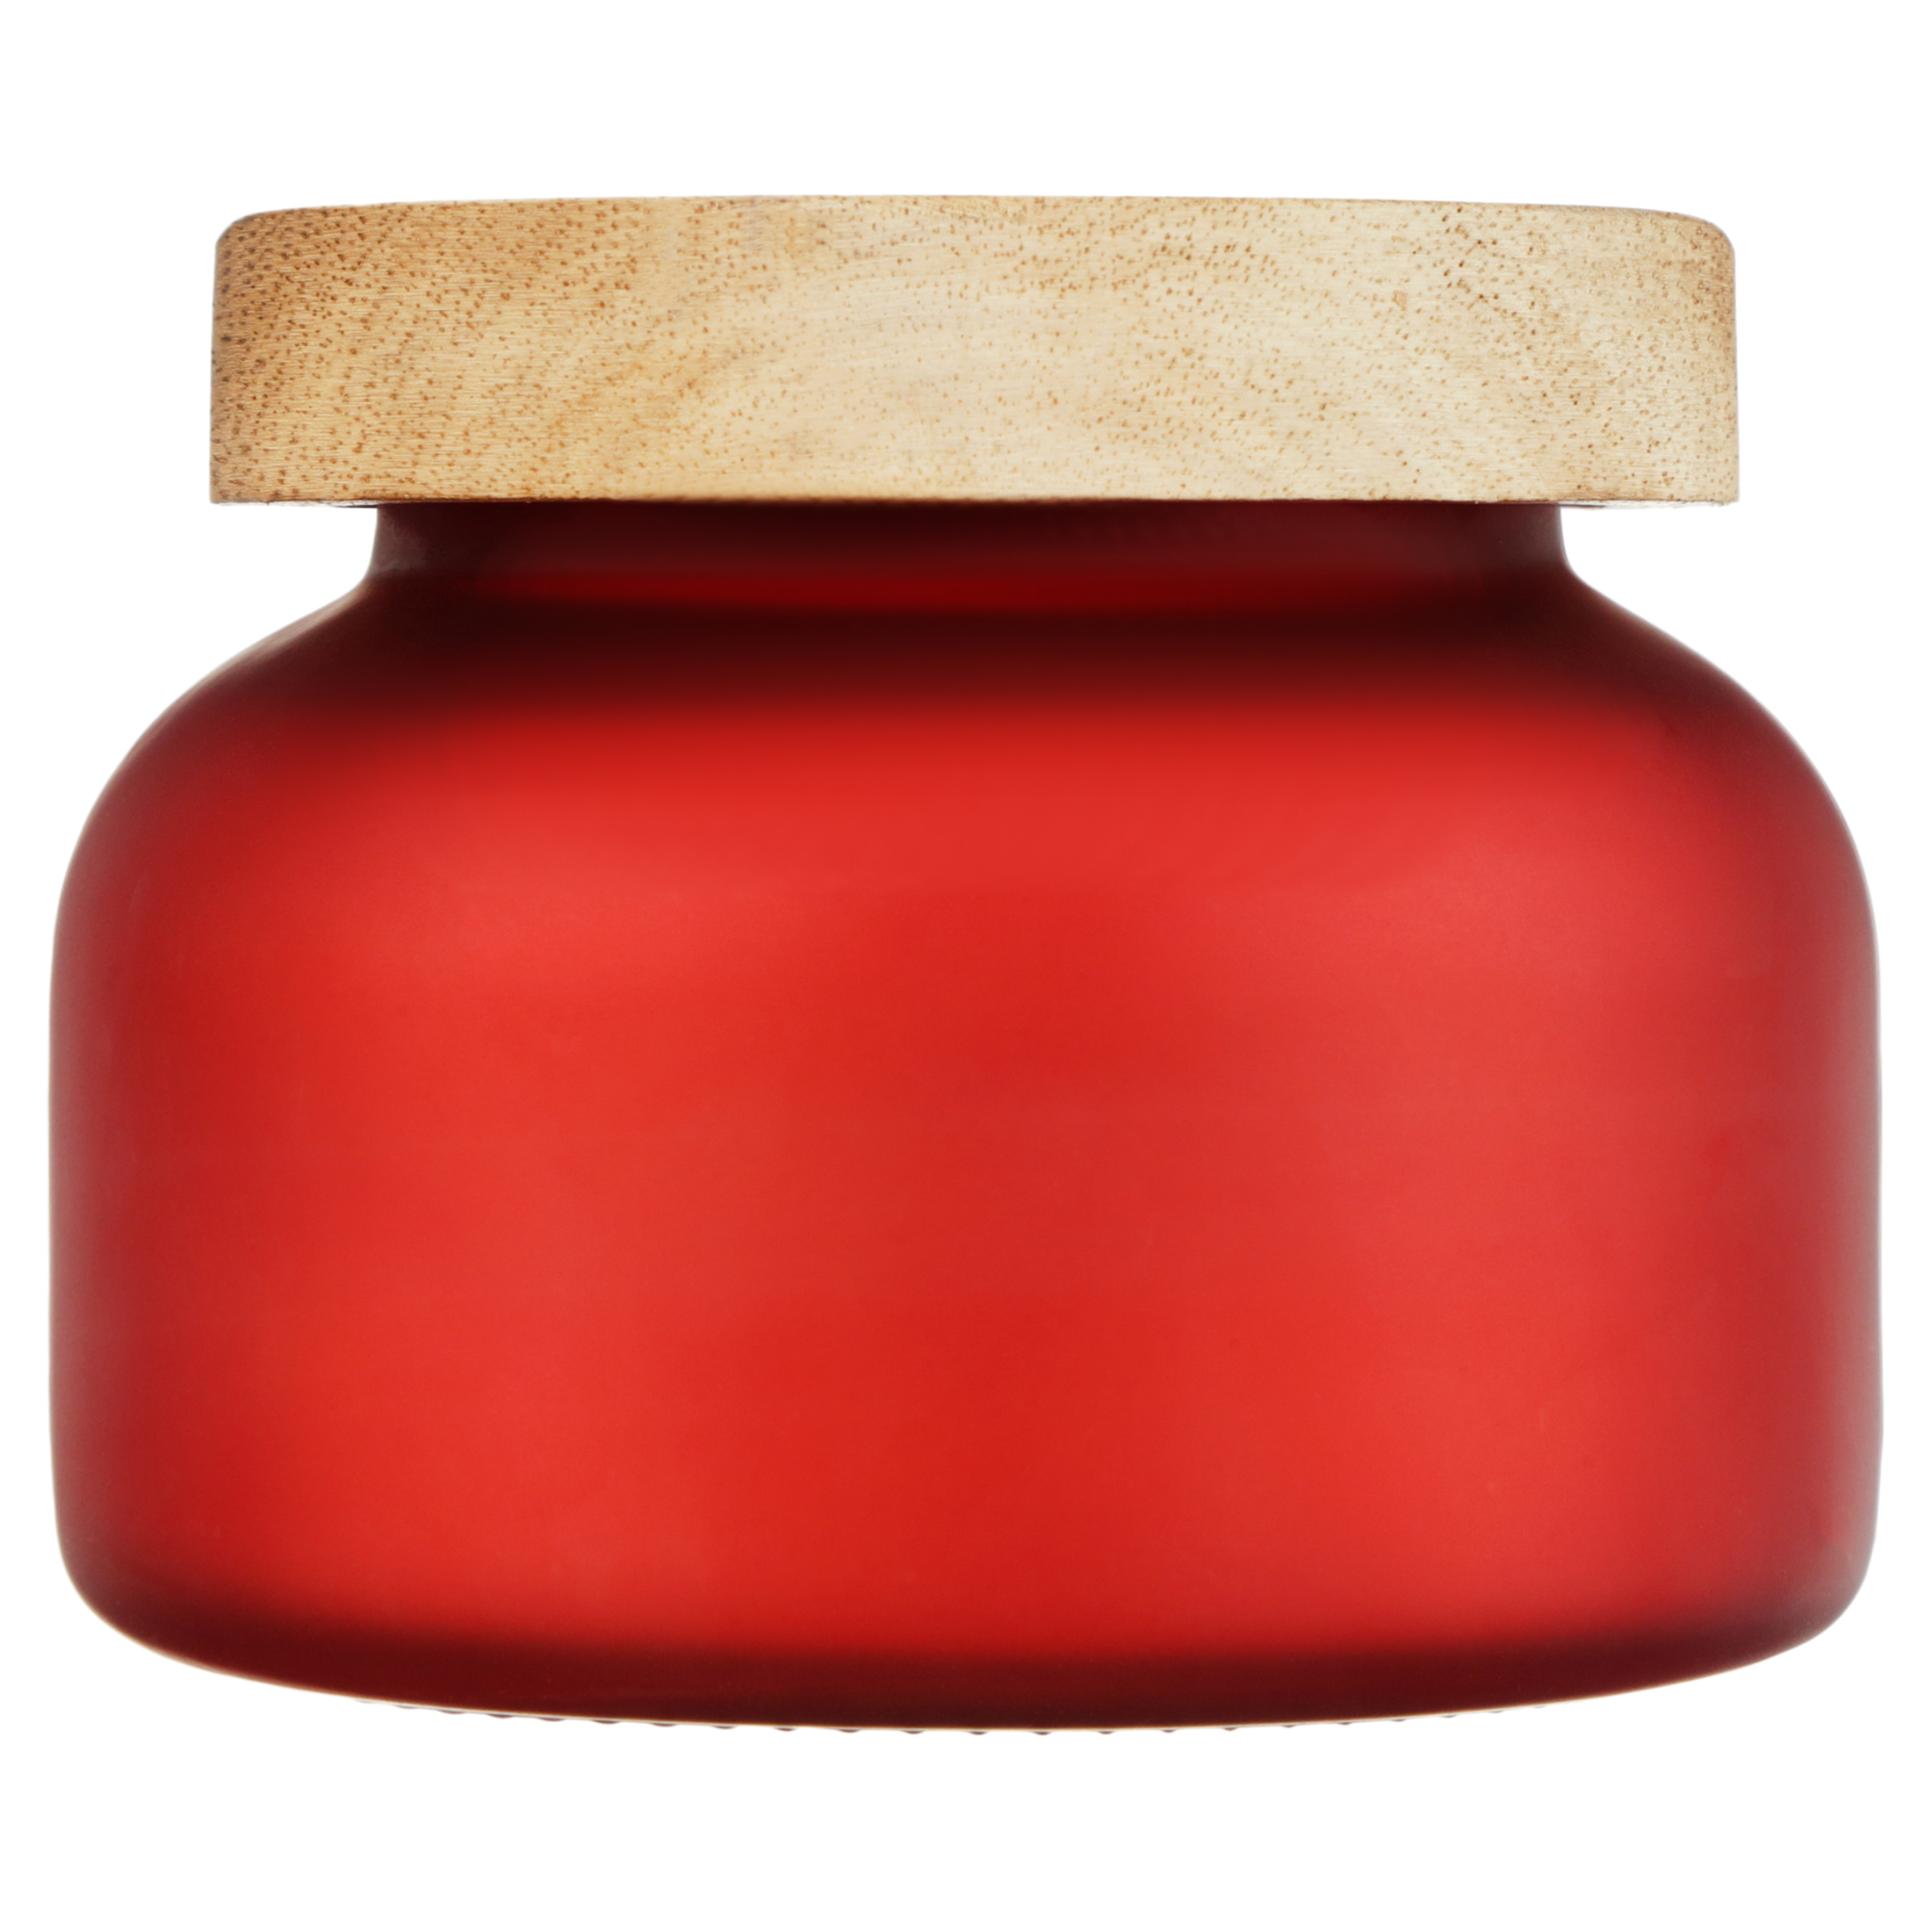 Better Homes & Gardens 18oz Red Lava Citrus Scented 2-Wick Frosted Bell Jar Candle - image 3 of 10